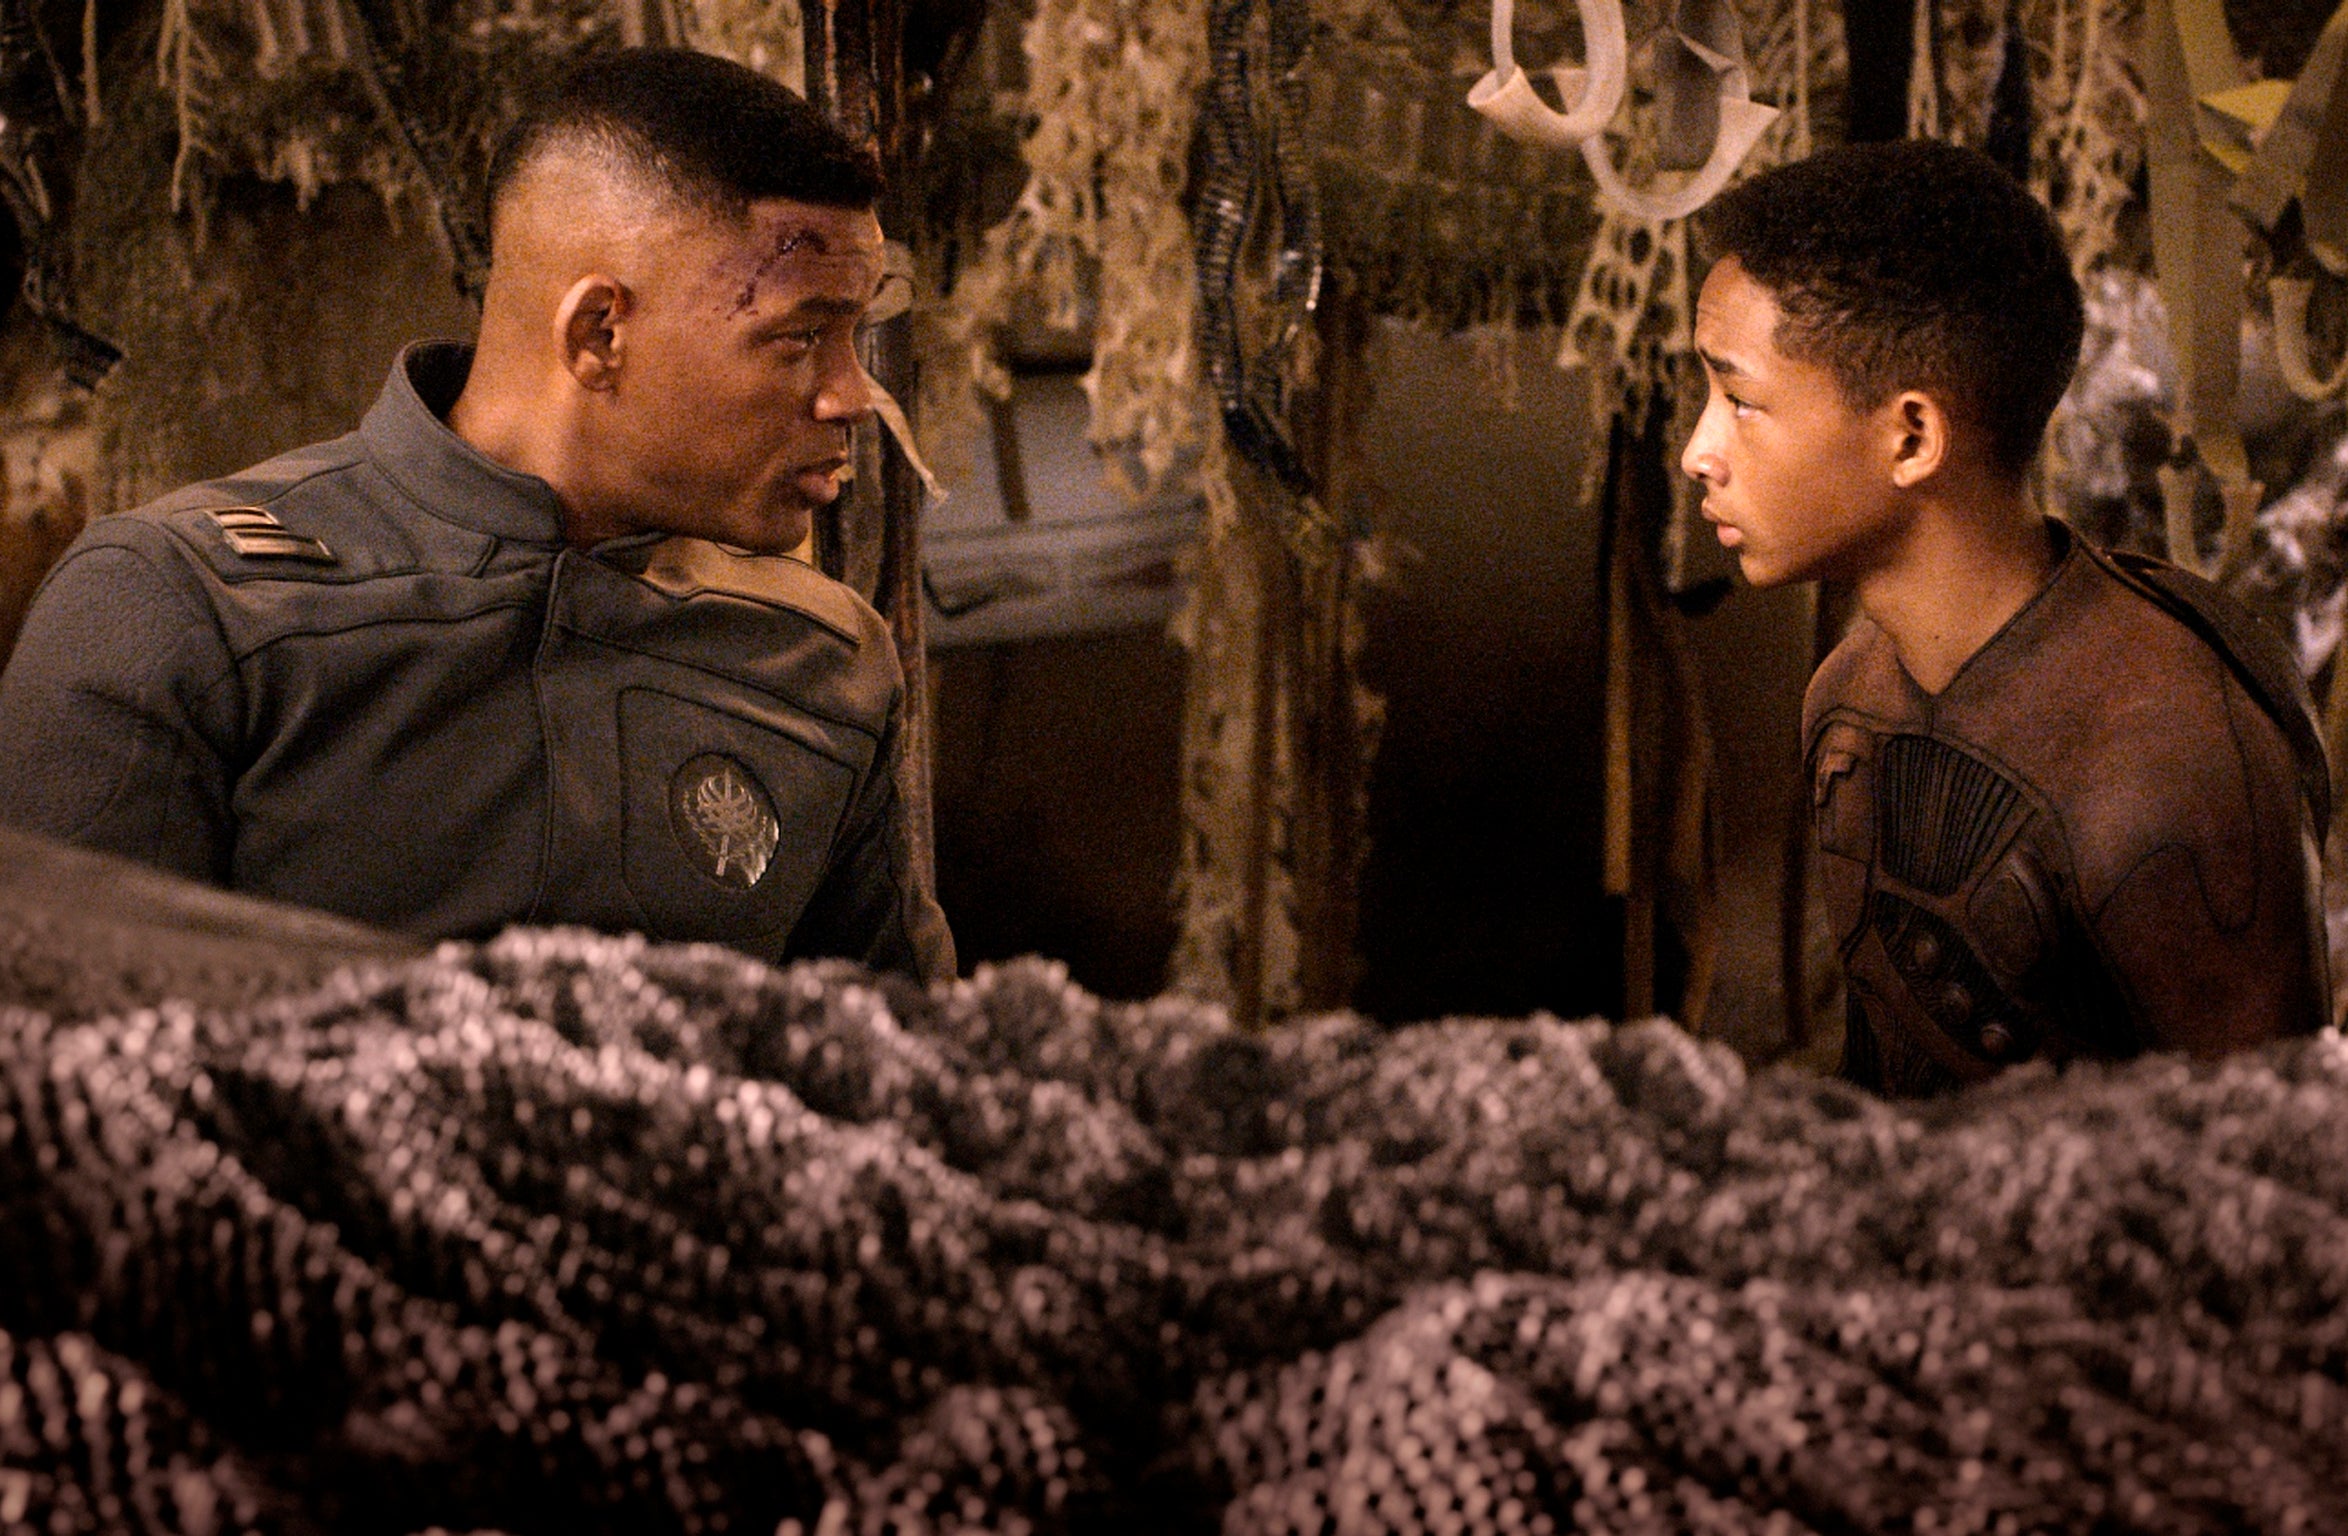 After Earth was described as 'stranded on Planet Nepotism' during the ceremony